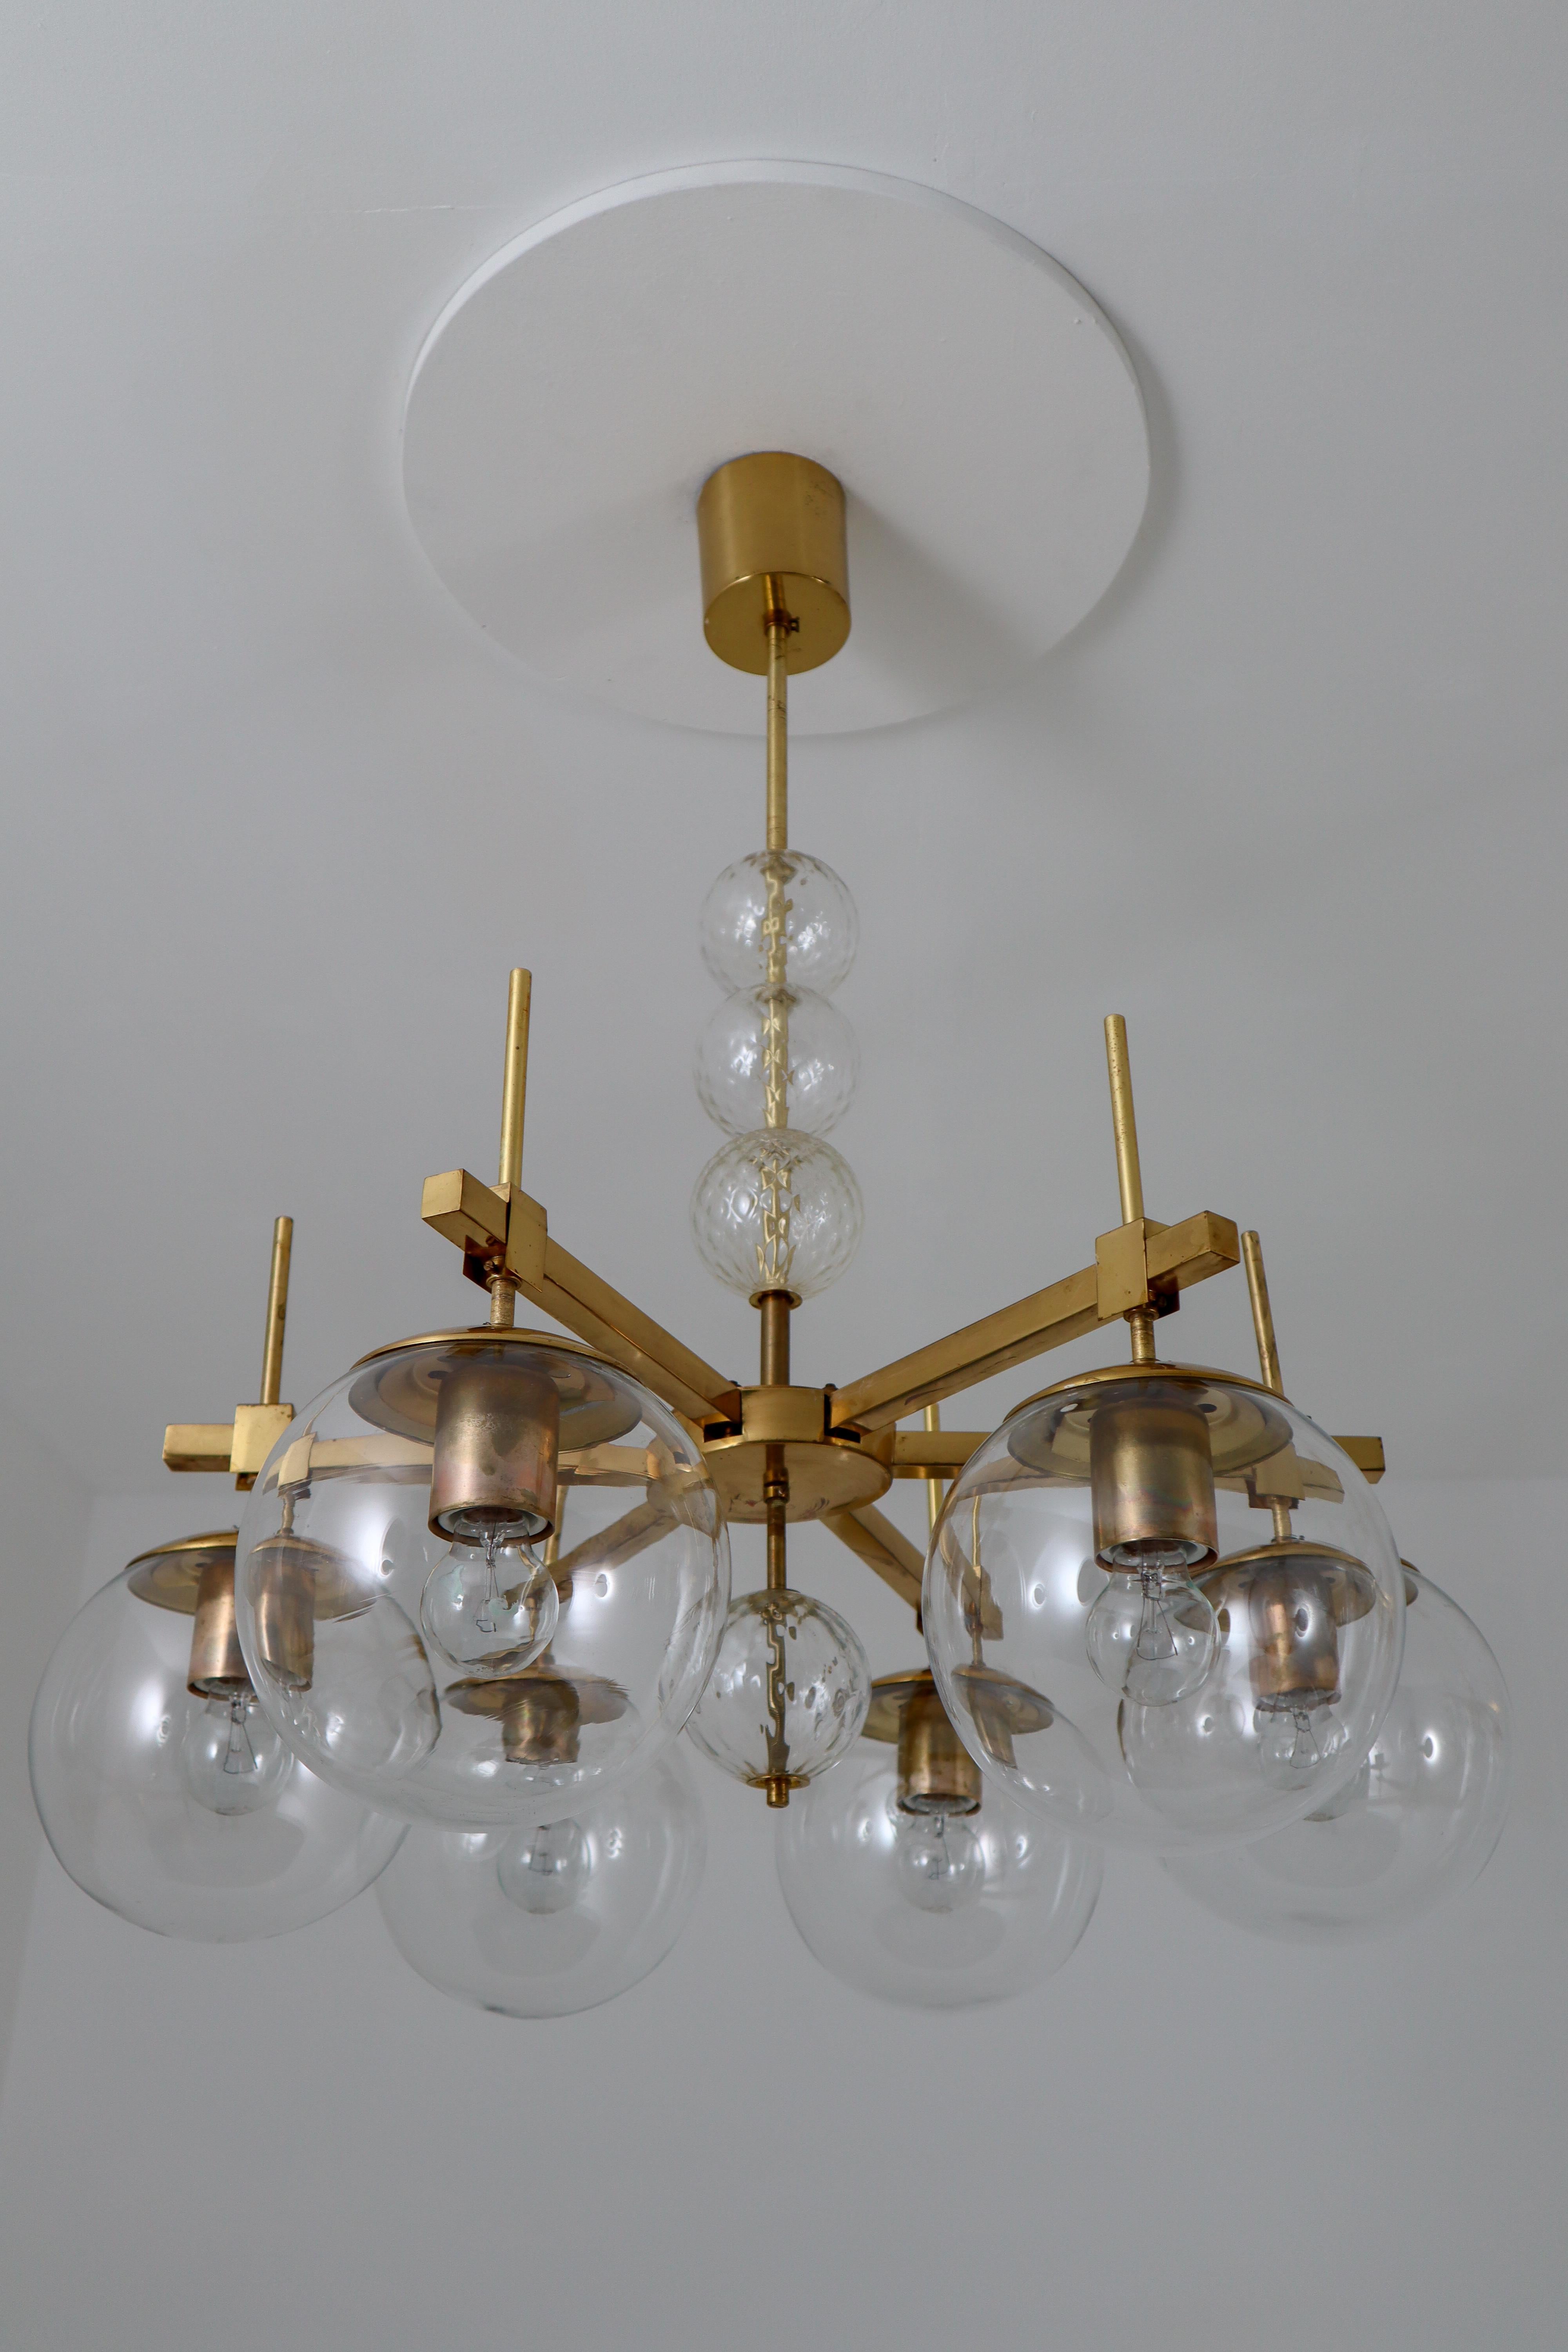 European Six Midcentury Chandeliers with Brass Fixture and Hand-Blown Glass, Europe